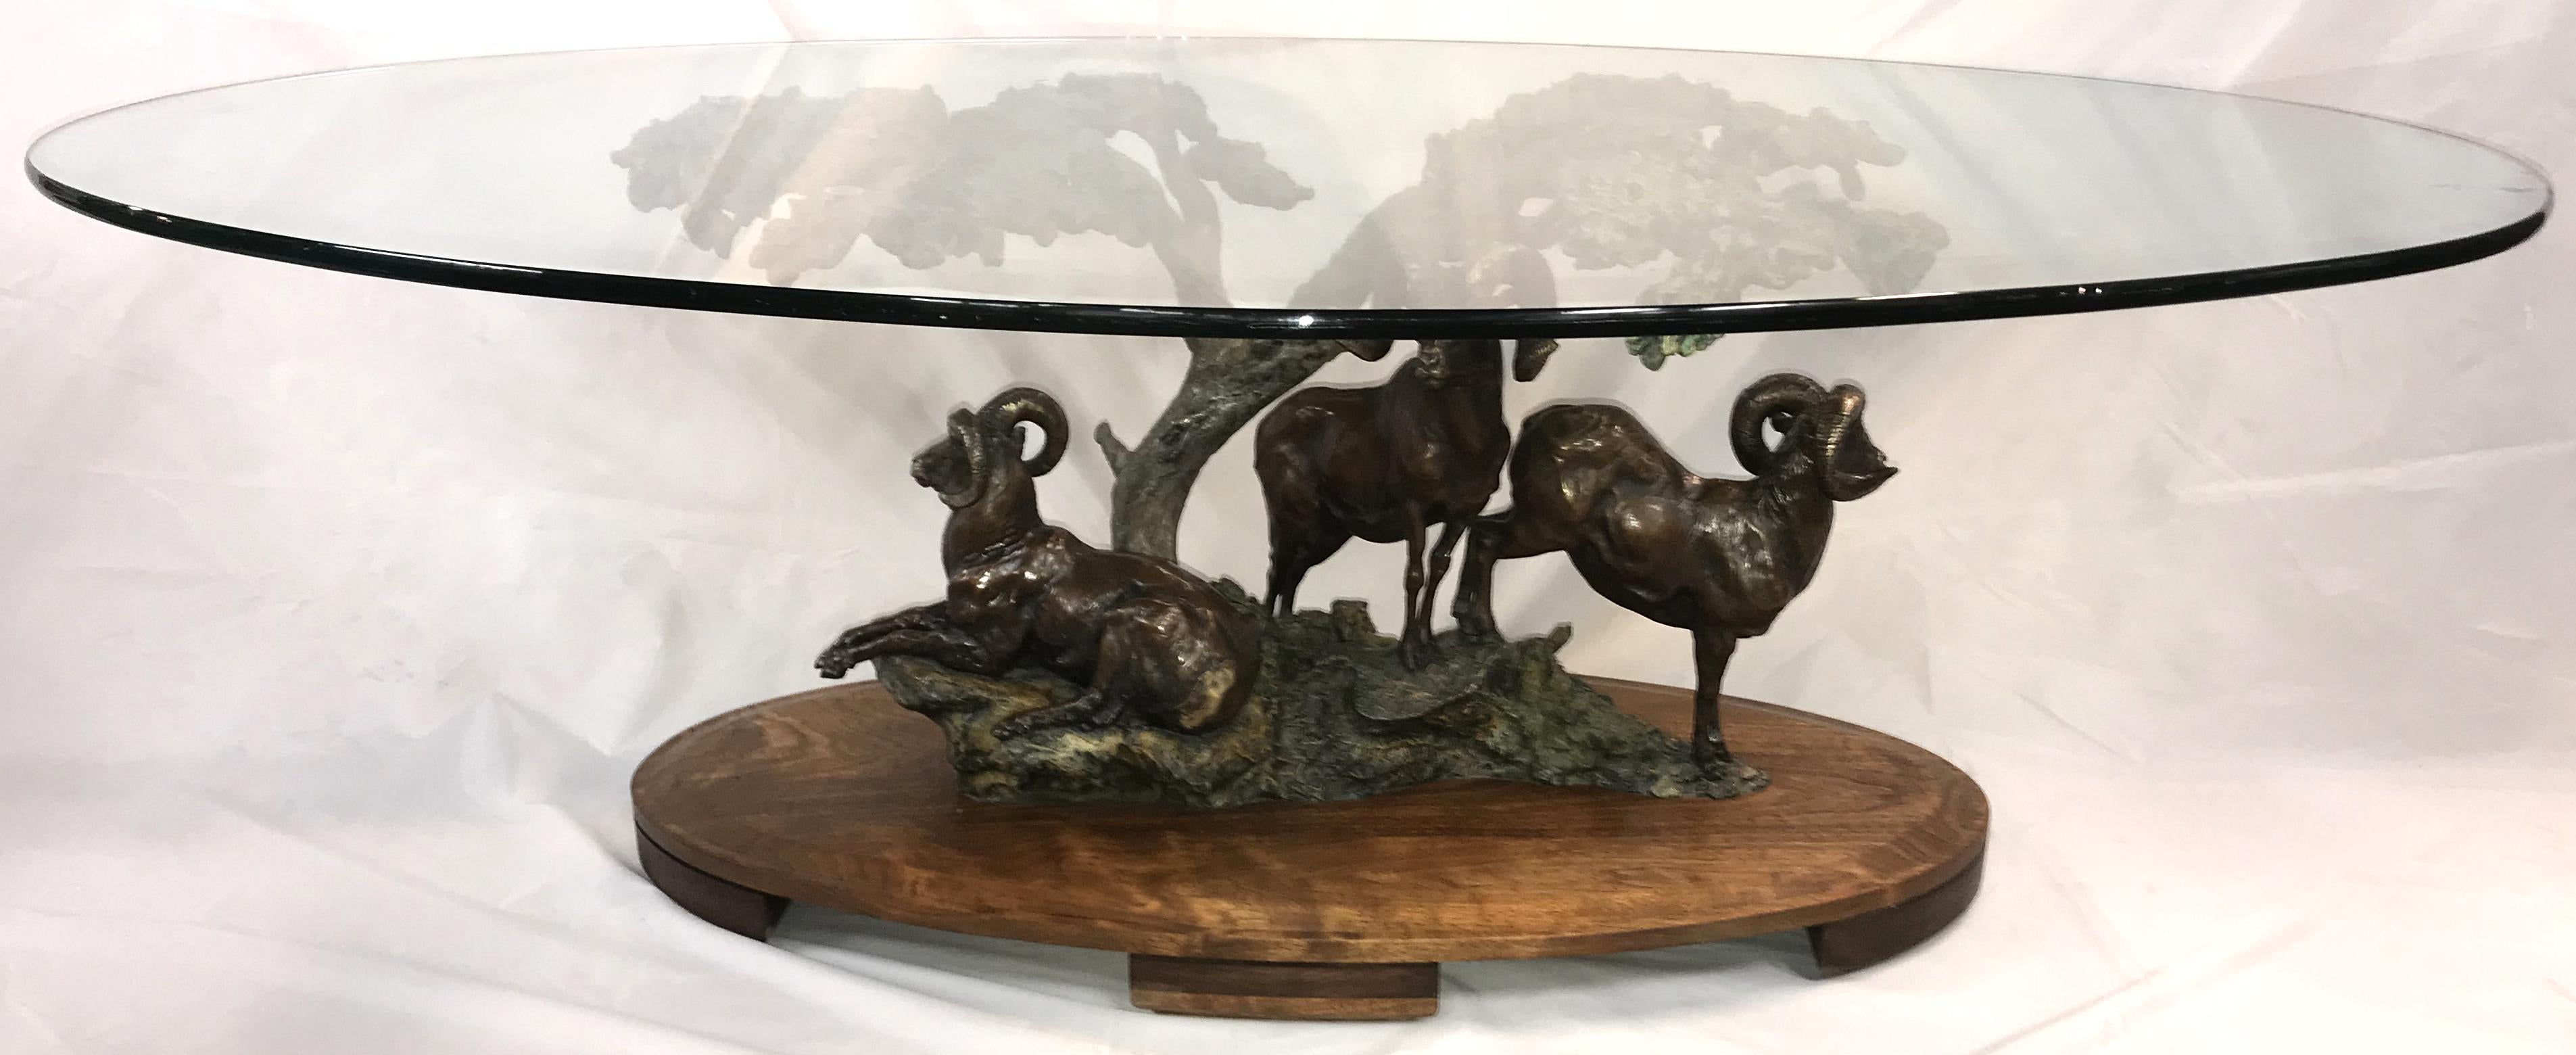 A fine limited edition coffee table, patinated cast bronze table sculpture of three rams under trees by American artist Daniel Ray Parker (b. 1959). Parker was born in Portland, Oregon and was raised in Kalispell, Montana, and was a mostly